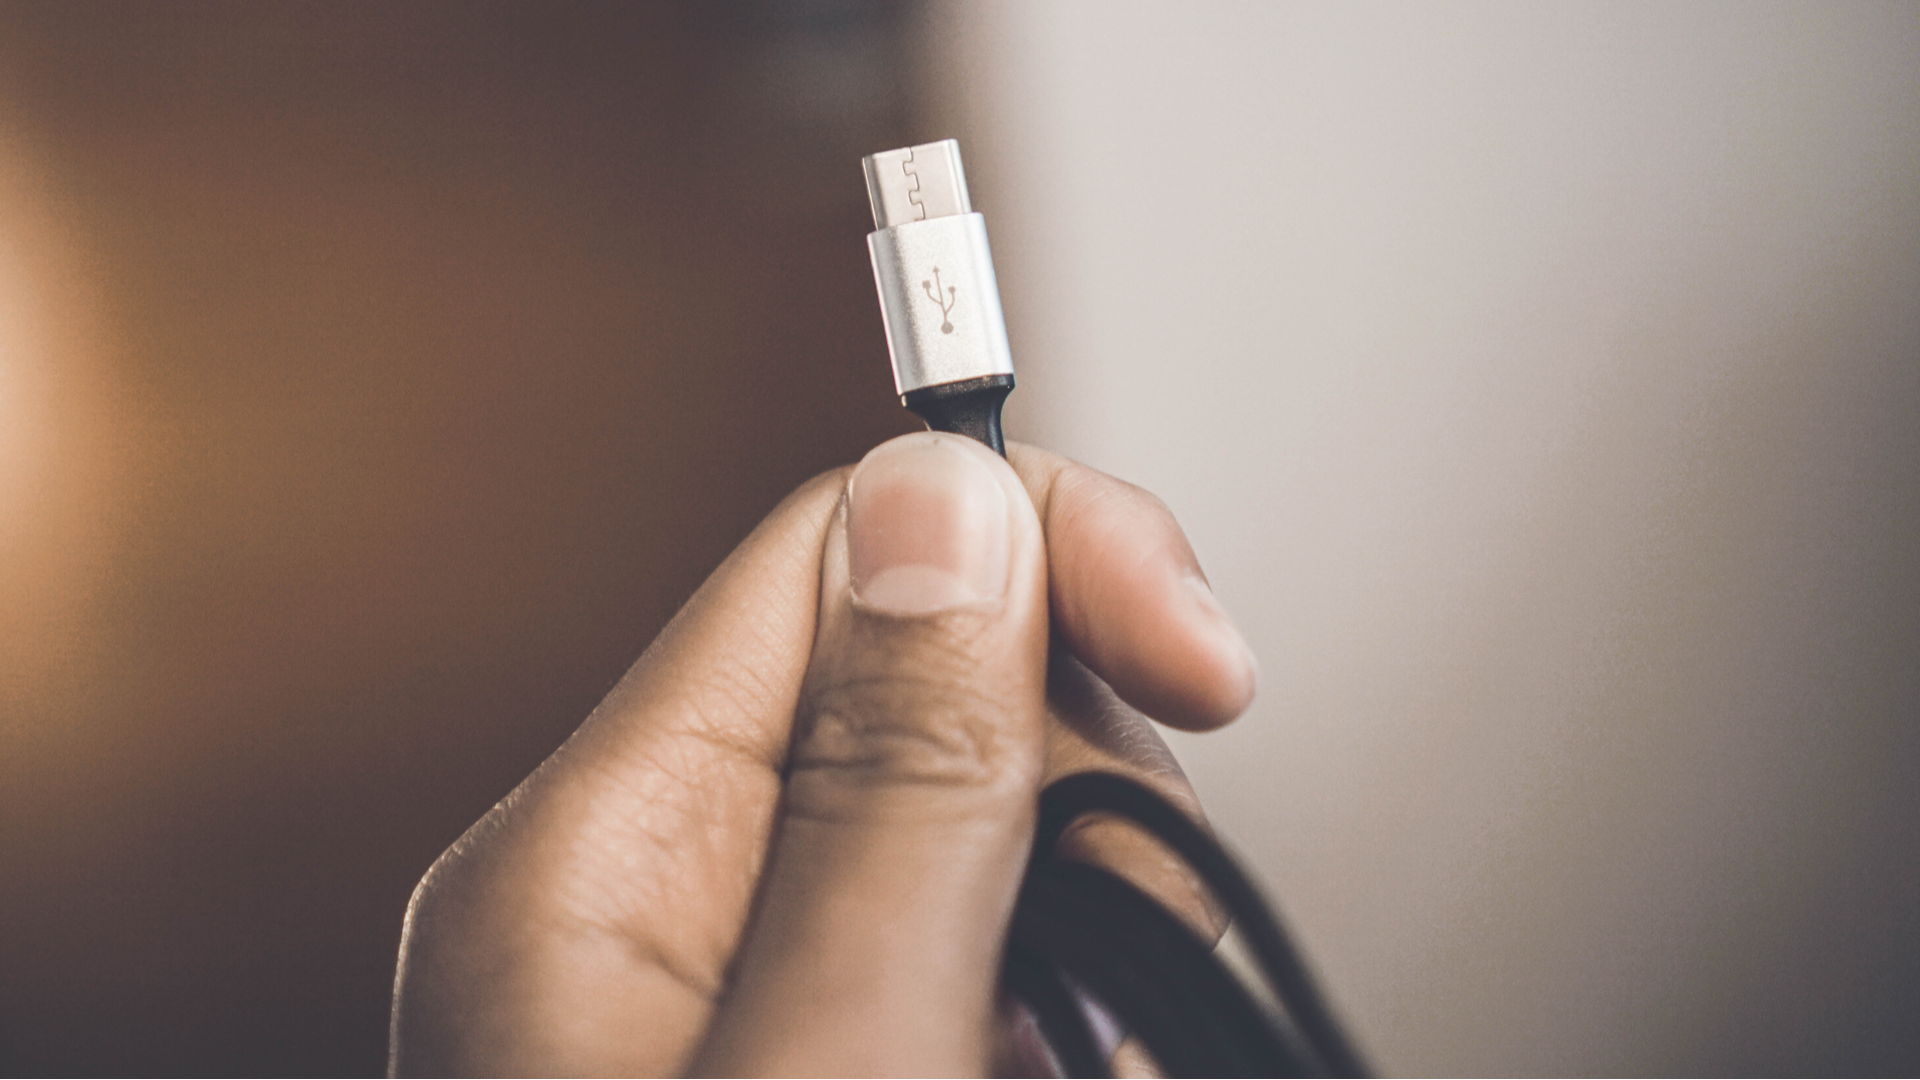 USB Type C Explained: What is USB-C and Why You'll Need It - Anker US